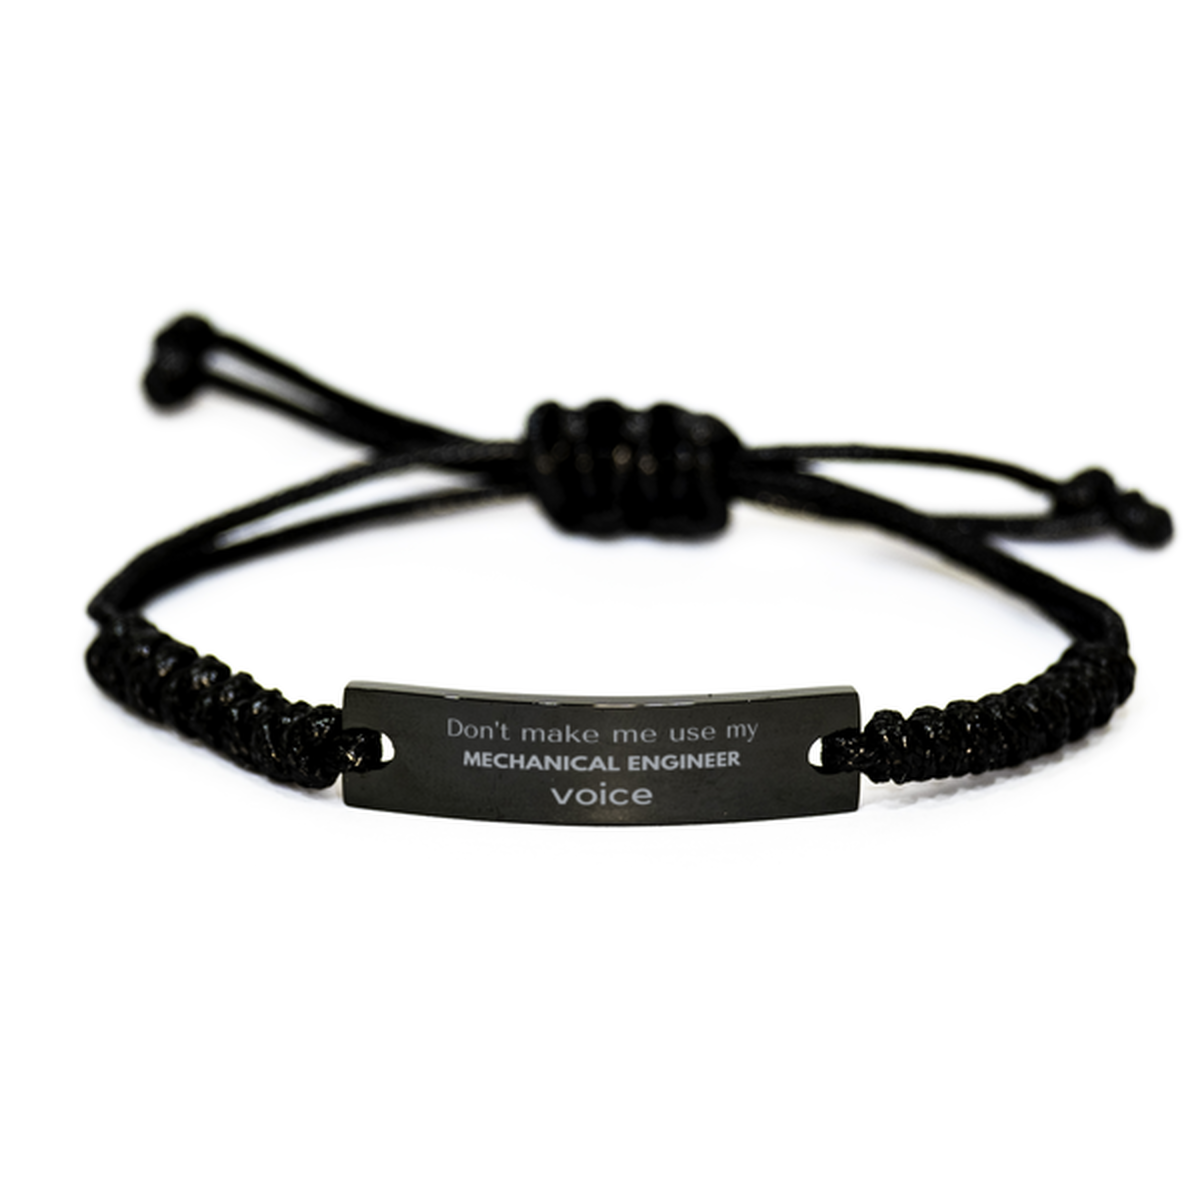 Don't make me use my Mechanical Engineer voice, Sarcasm Mechanical Engineer Gifts, Christmas Mechanical Engineer Black Rope Bracelet Birthday Unique Gifts For Mechanical Engineer Coworkers, Men, Women, Colleague, Friends